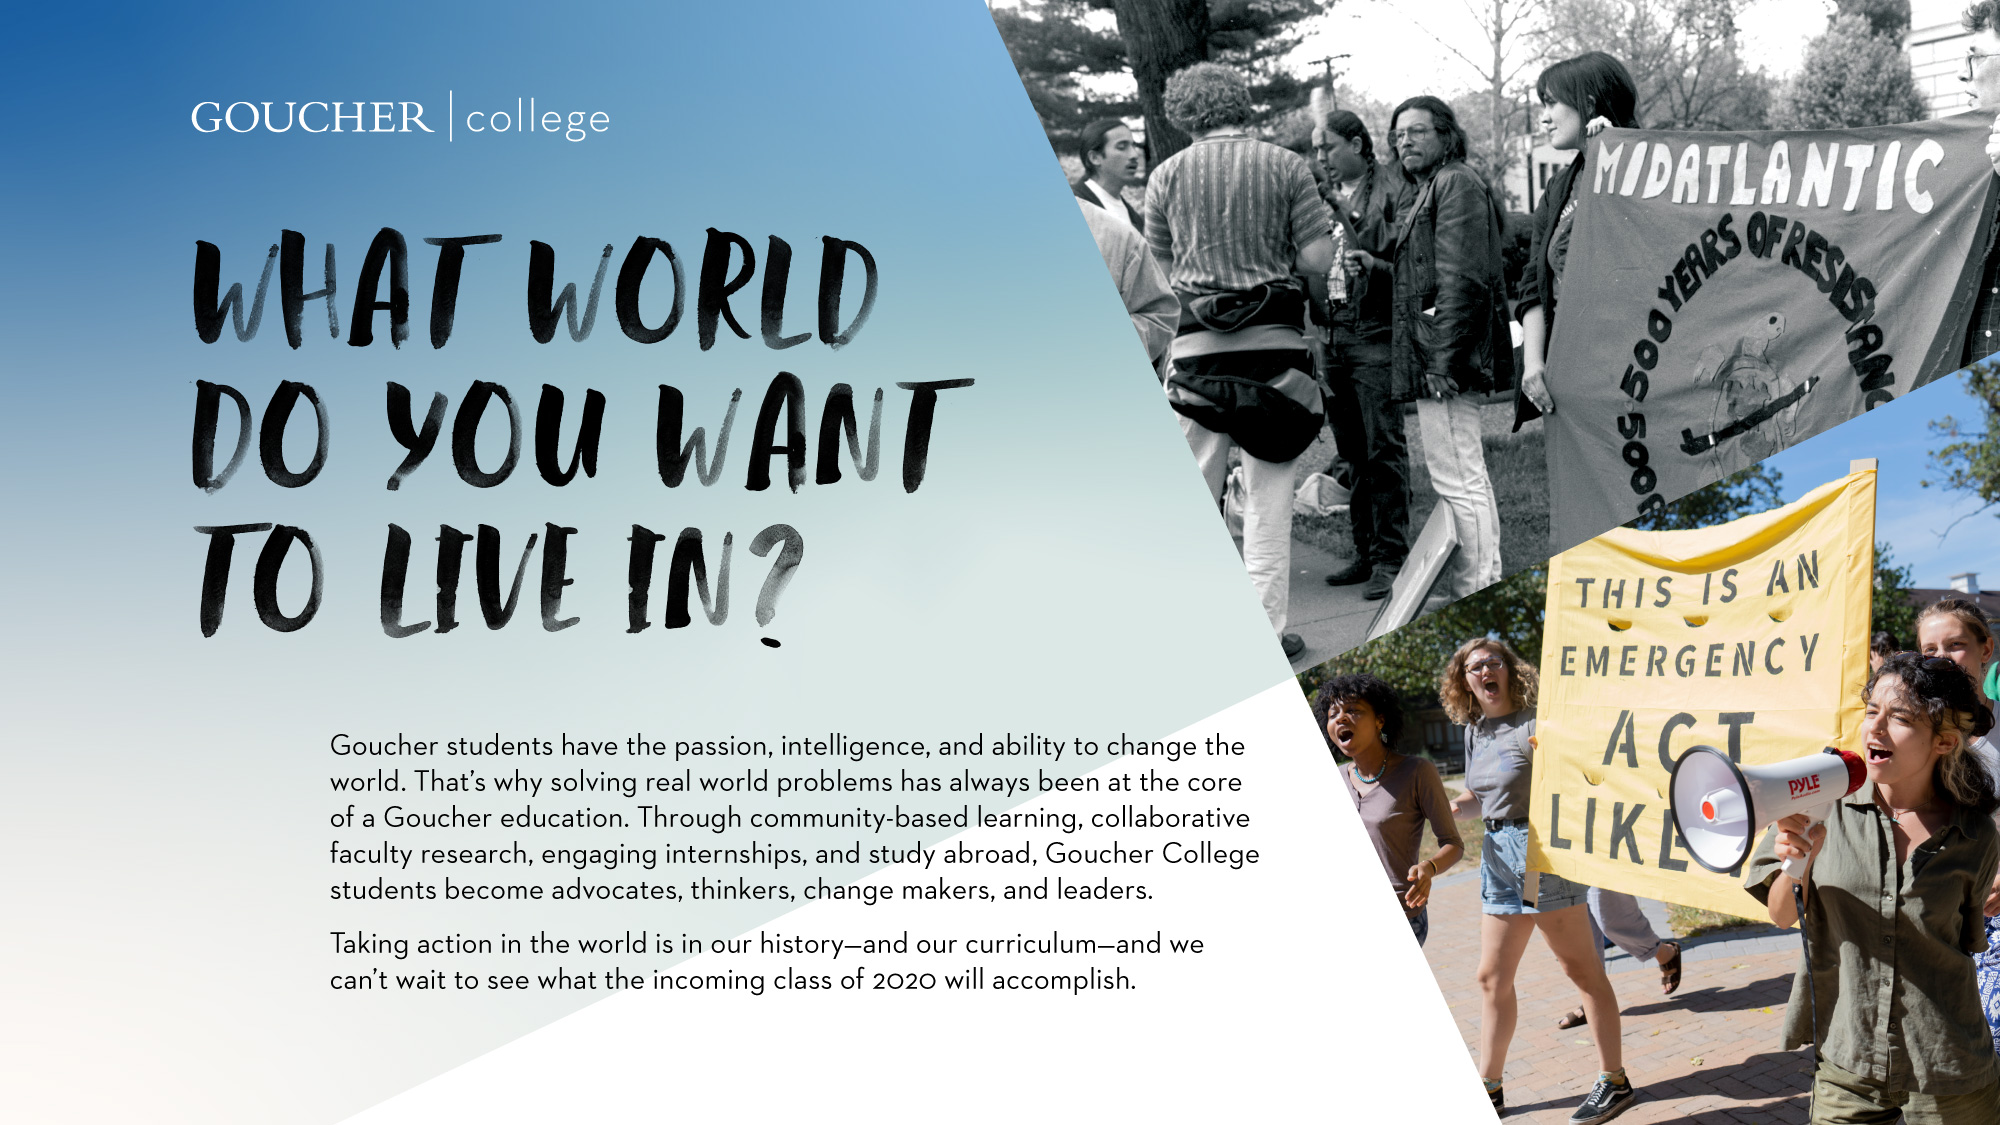 What World Do You Want to Live In - Goucher Students have the passion, intelligence, and ability to change the world.